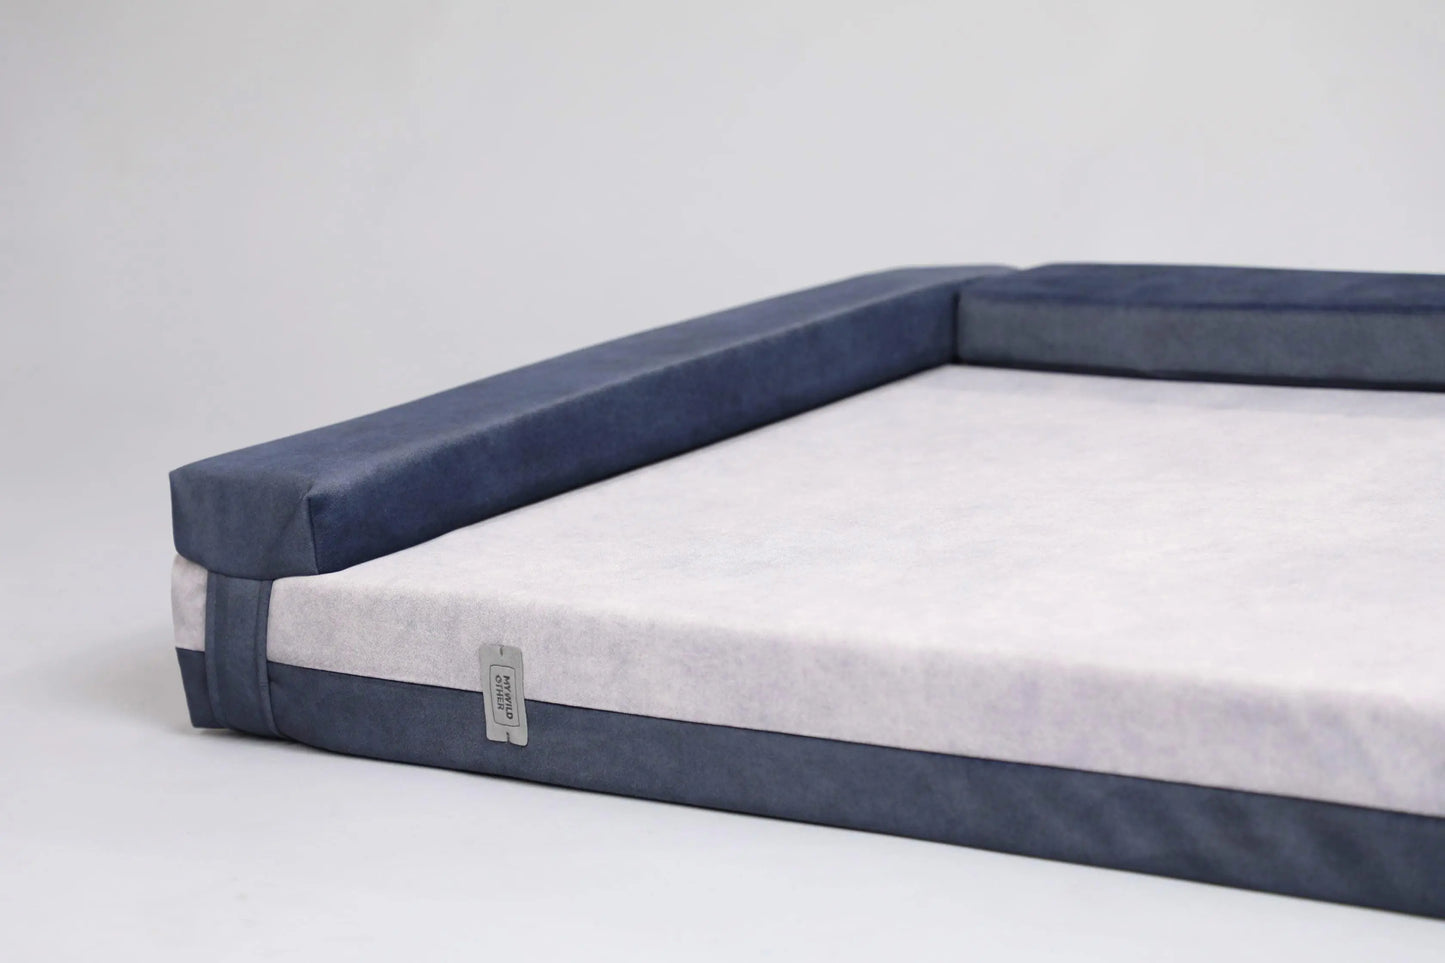 Transformer dog bed | Extra comfort & support | 2-sided | NAVY BLUE+CLOUD GREY